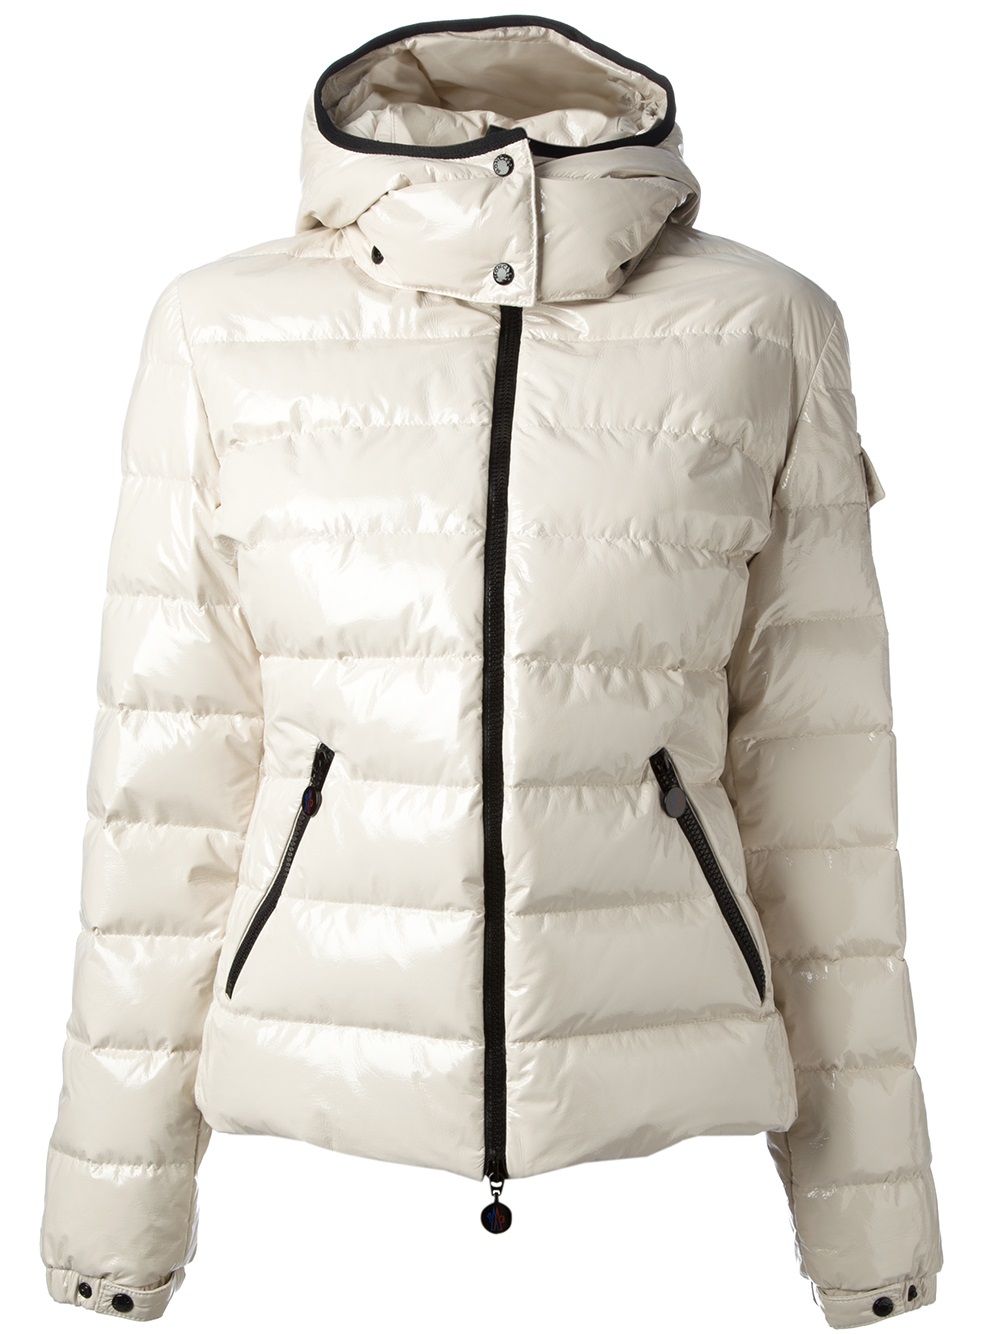 Moncler Bady Jacket in White - Lyst